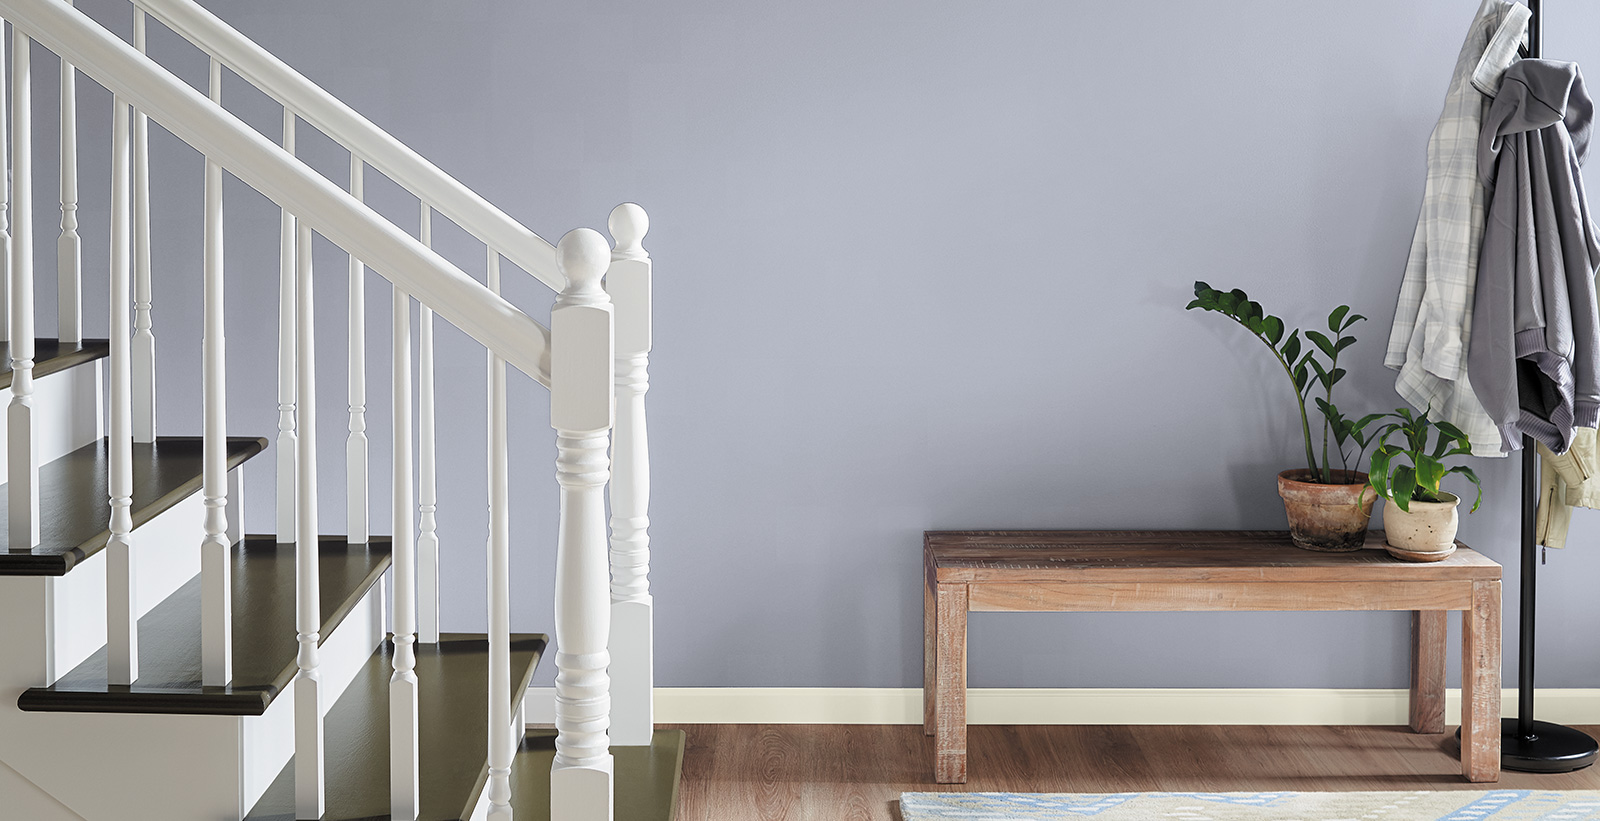 Hallway with stairs, light purple wall, and white trim, relaxed calming style.